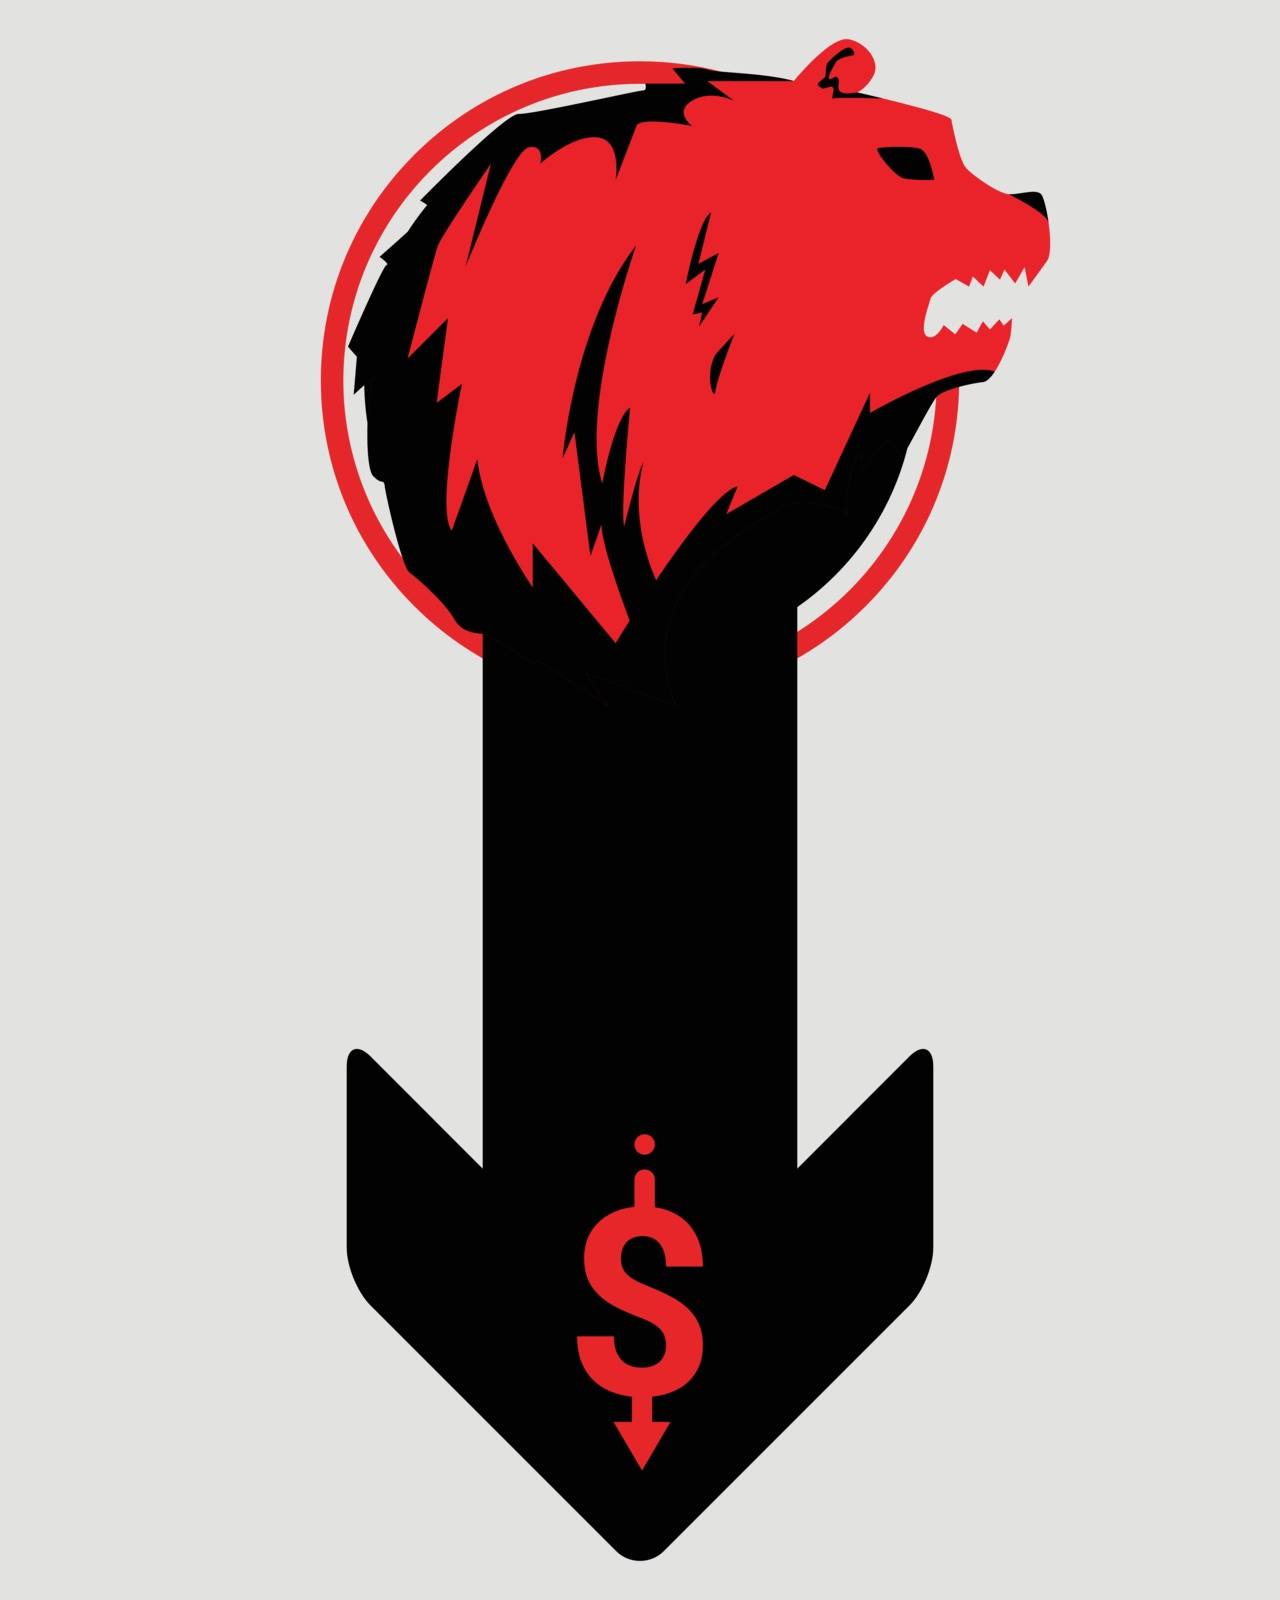 Bearish symbols on stock market vector. Fund, forex or commodity falling price, isolated on gray background. Red bear with down arrow and dallar sign, droping investment trading. Down trend concept by foxeel